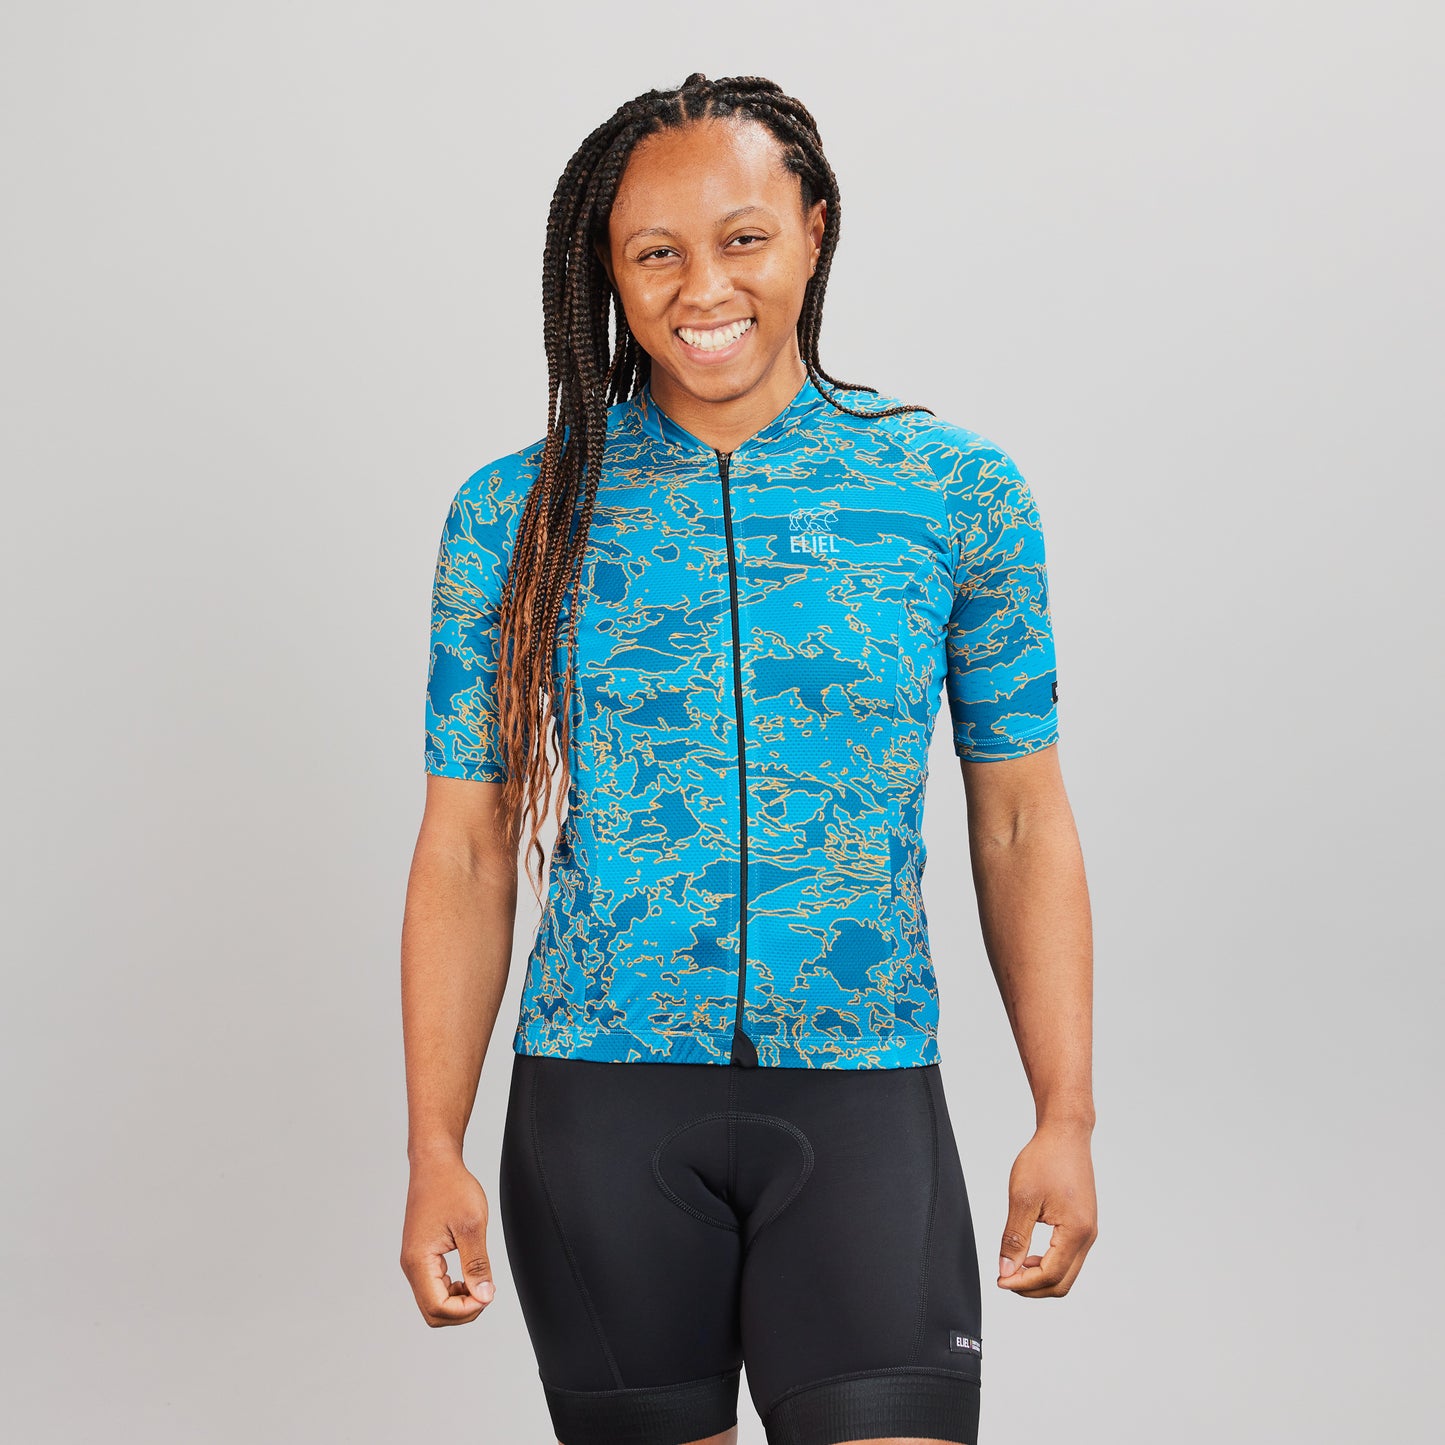 Women's Joshua Tree Rincon Relaxed Fit Jersey - Yucca Night